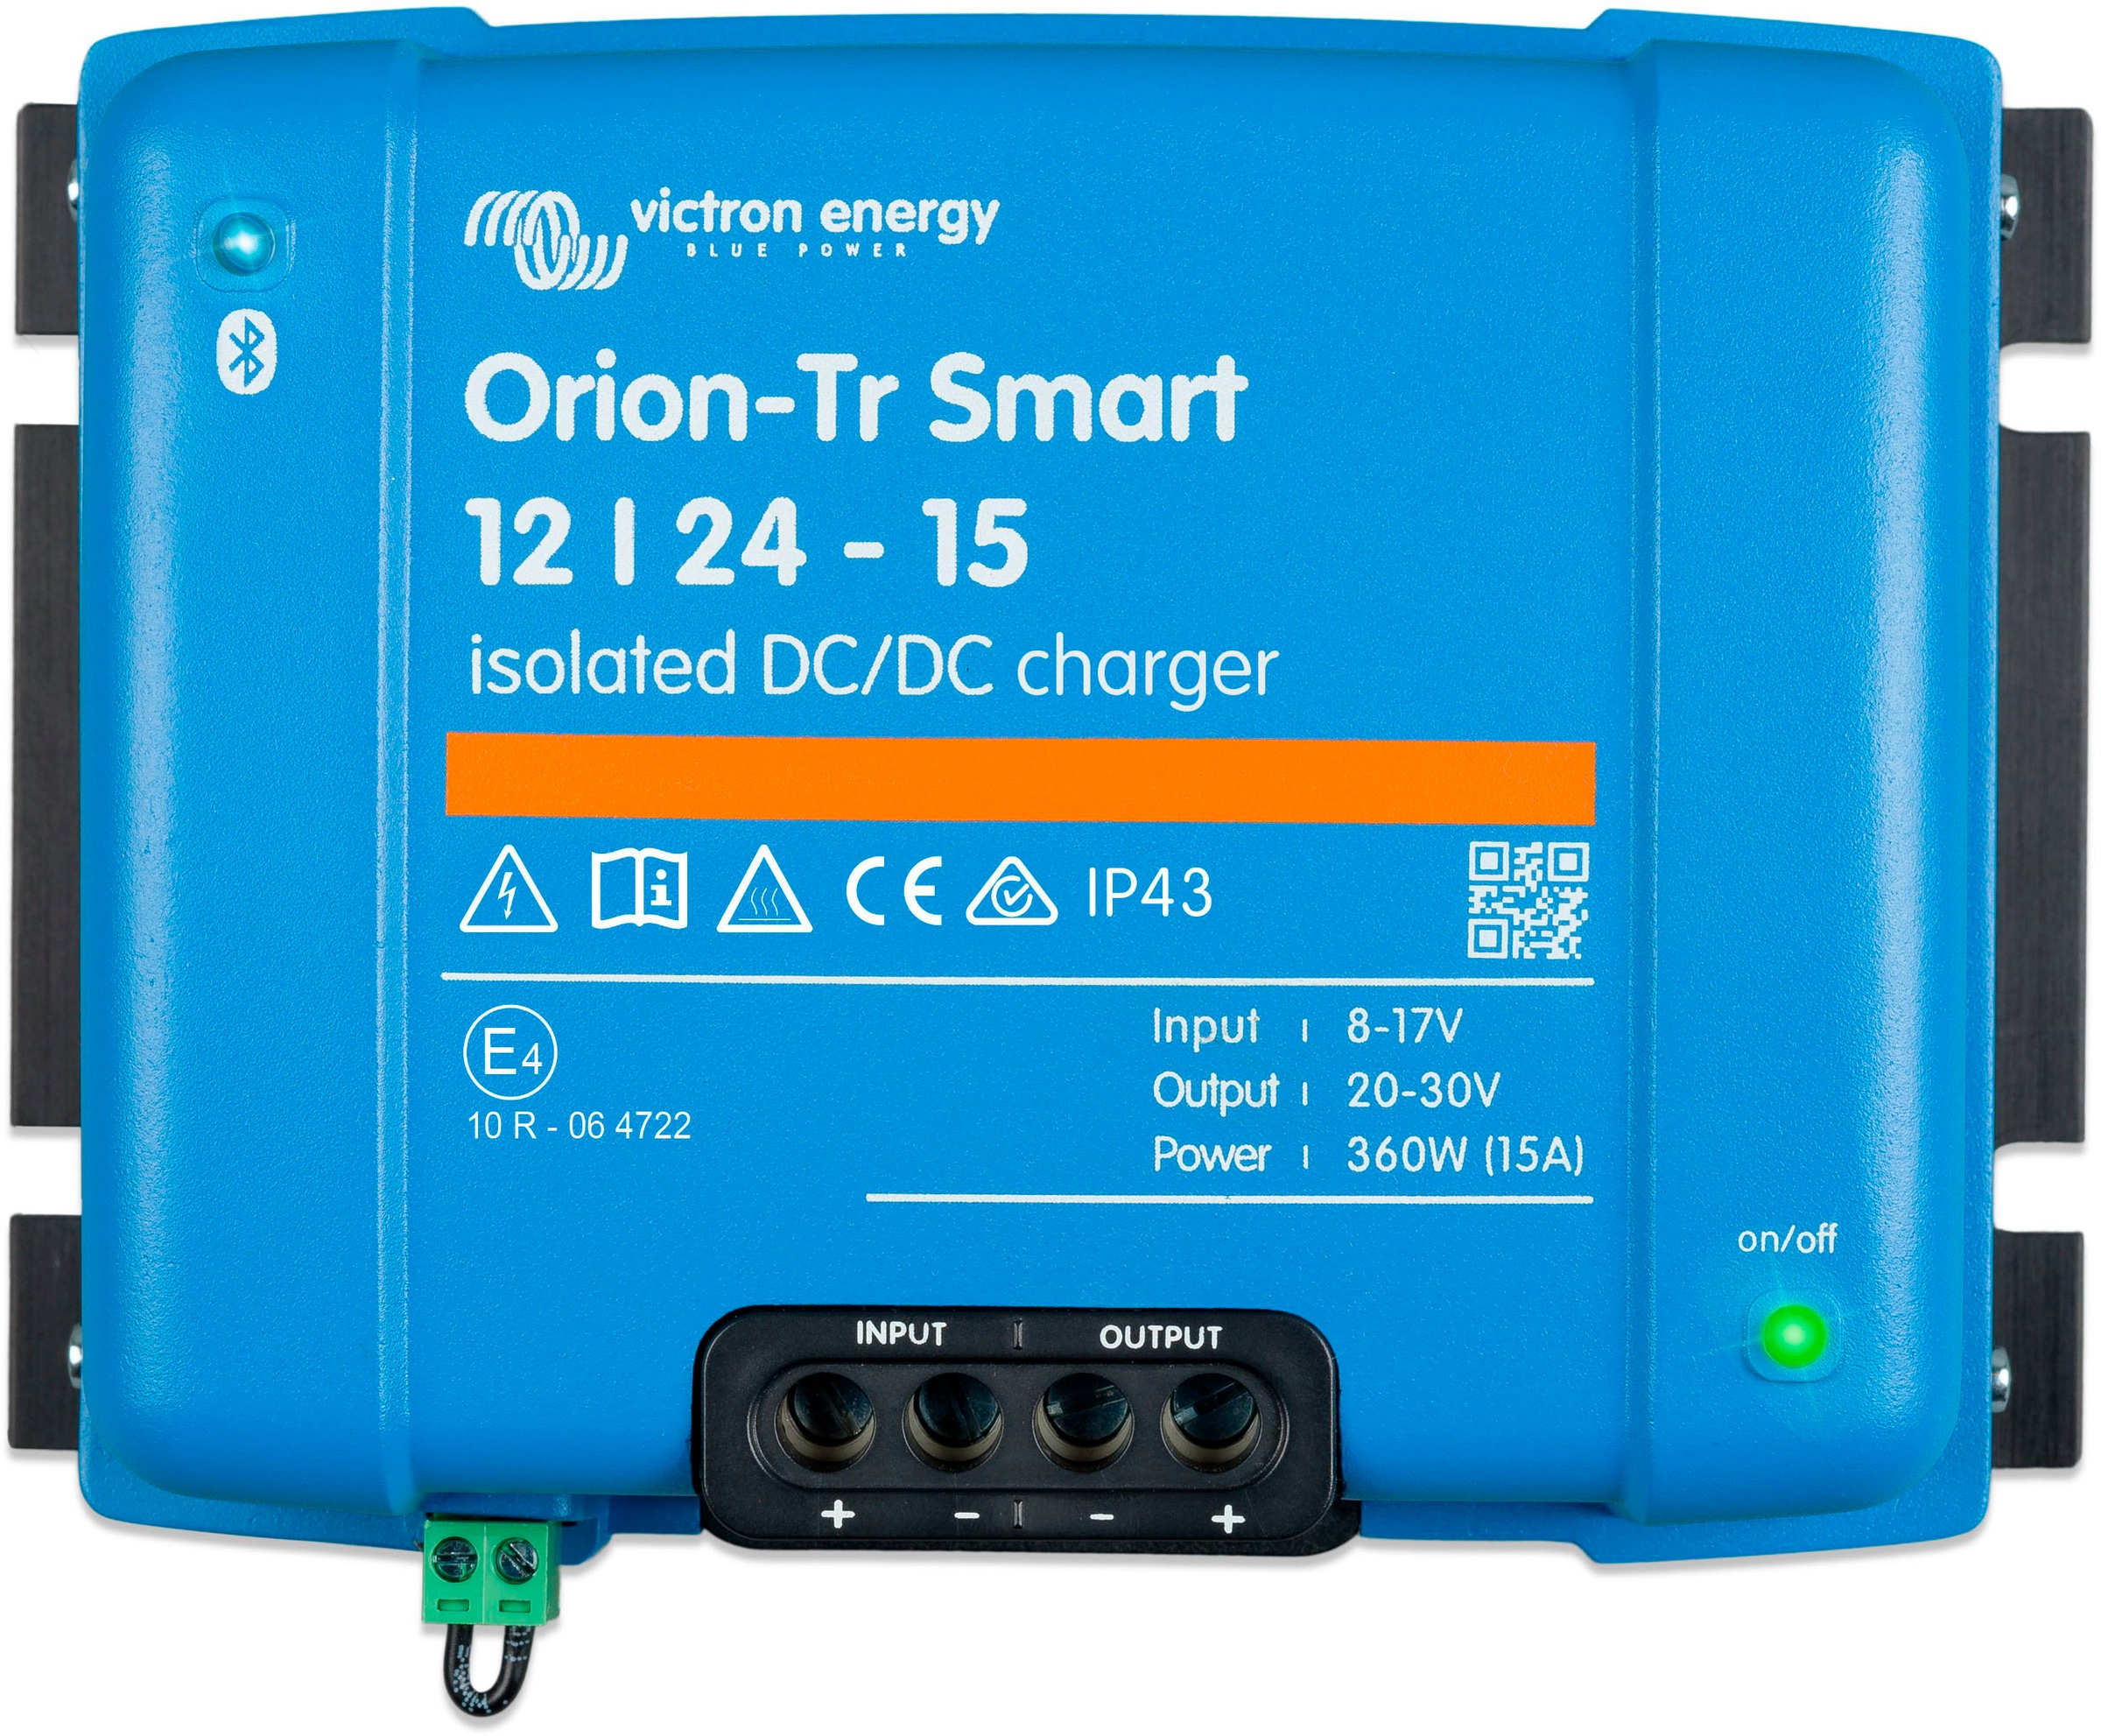 Wandler ""DC/DC Charger Victron Orion-Tr Smart 12/24-15 non-iso""